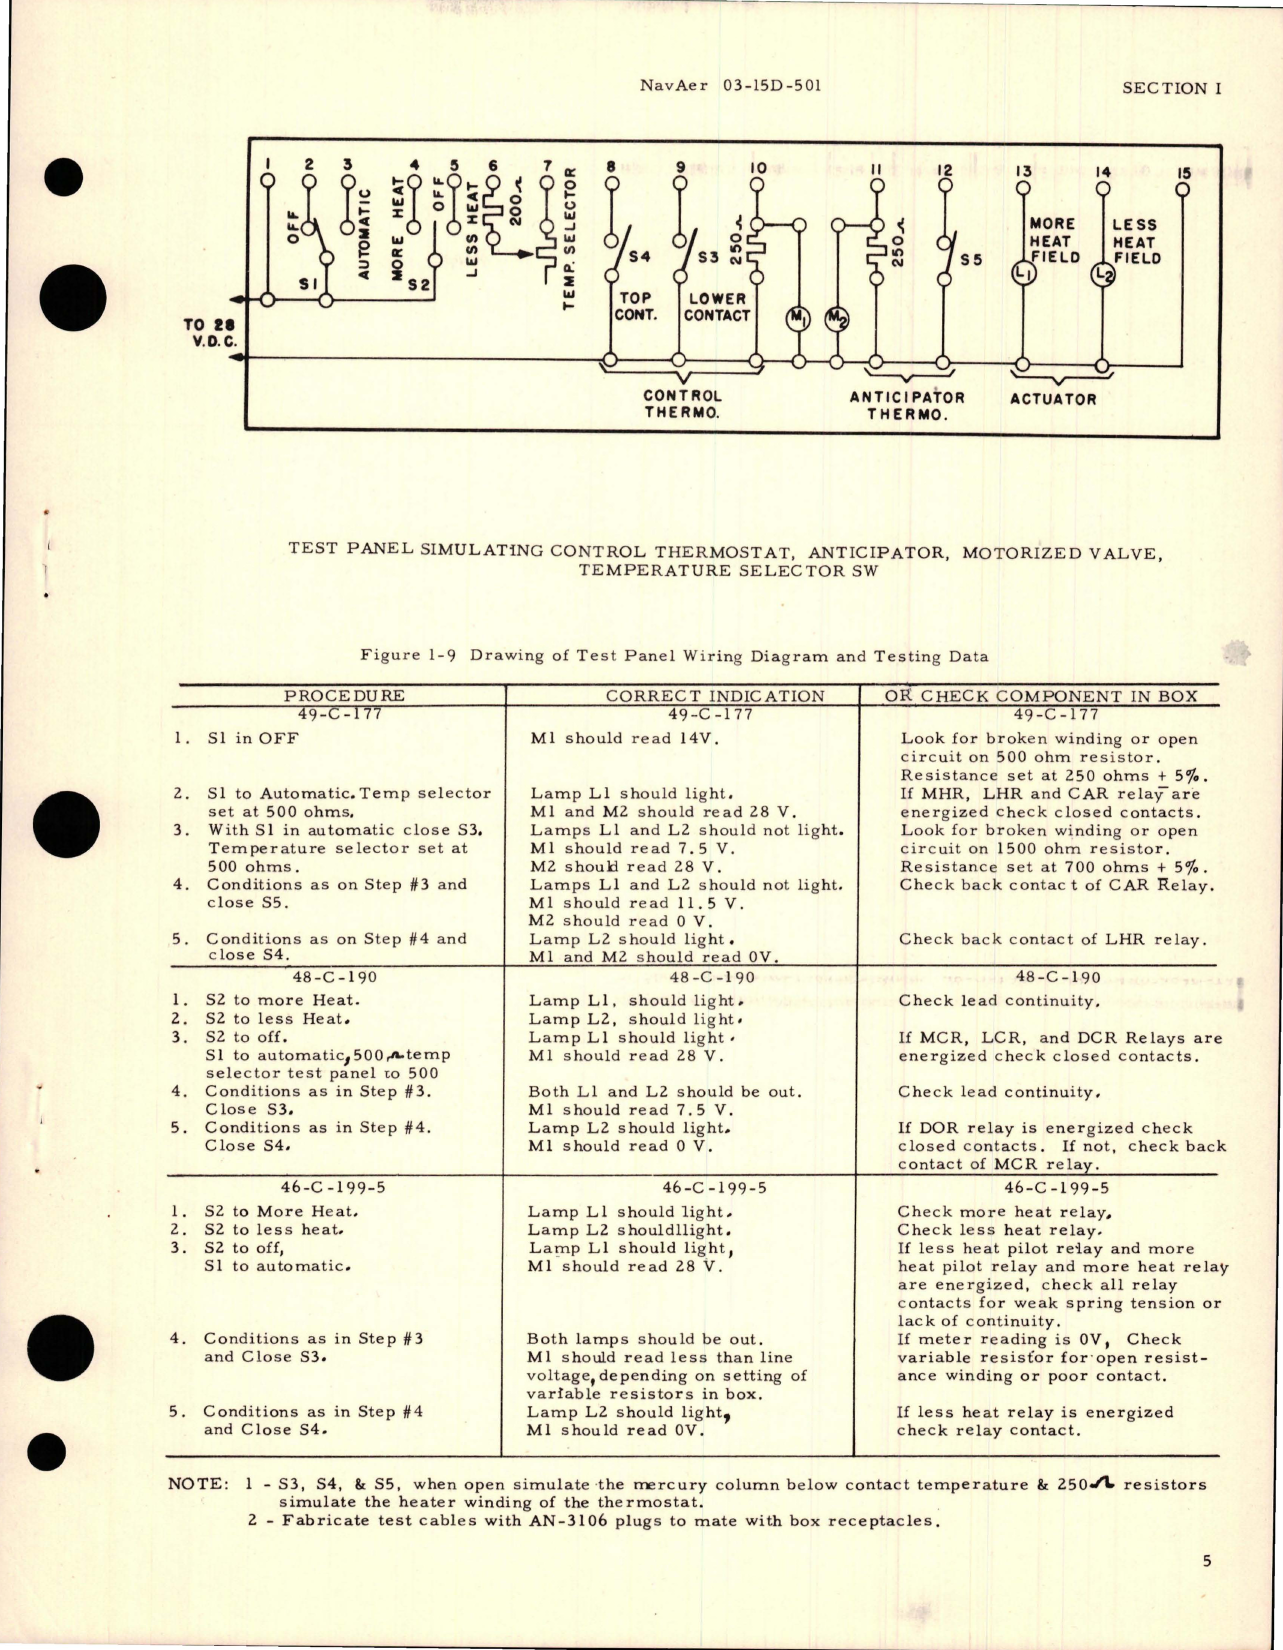 Sample page 7 from AirCorps Library document: Overhaul Instructions with Parts Catalog for Control Boxes - Parts 49-C-177, 48-C-190, and 46-C-199-5